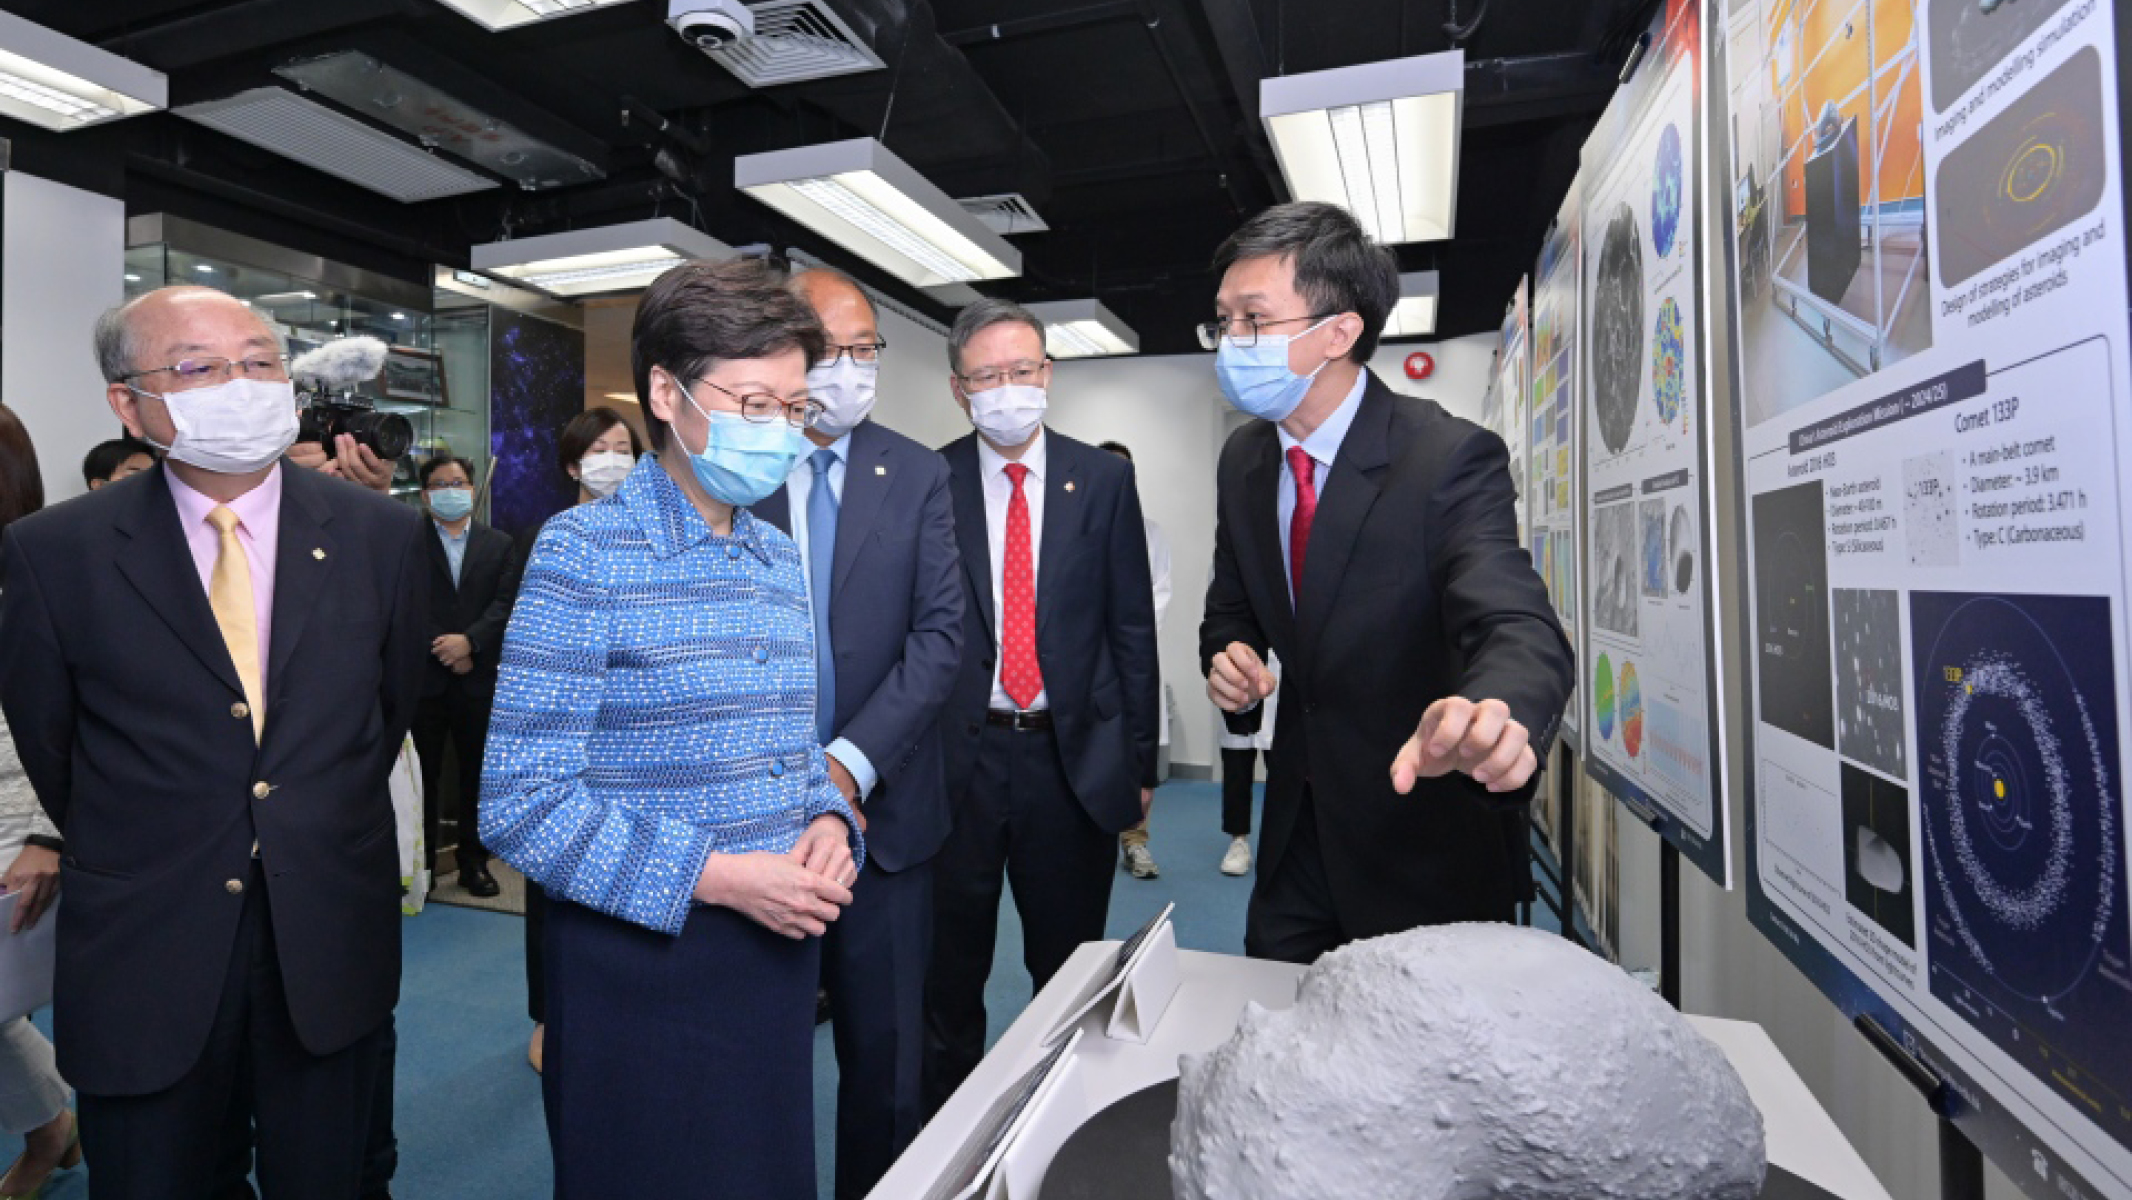 Professor Wu Bo (right), Associate Head of Department of Land Surveying and Geo-Informatics, showed Mrs Lam a 3D model of the asteroid Itokawa, and talked about initiatives supporting the Nation’s future asteroid exploration.